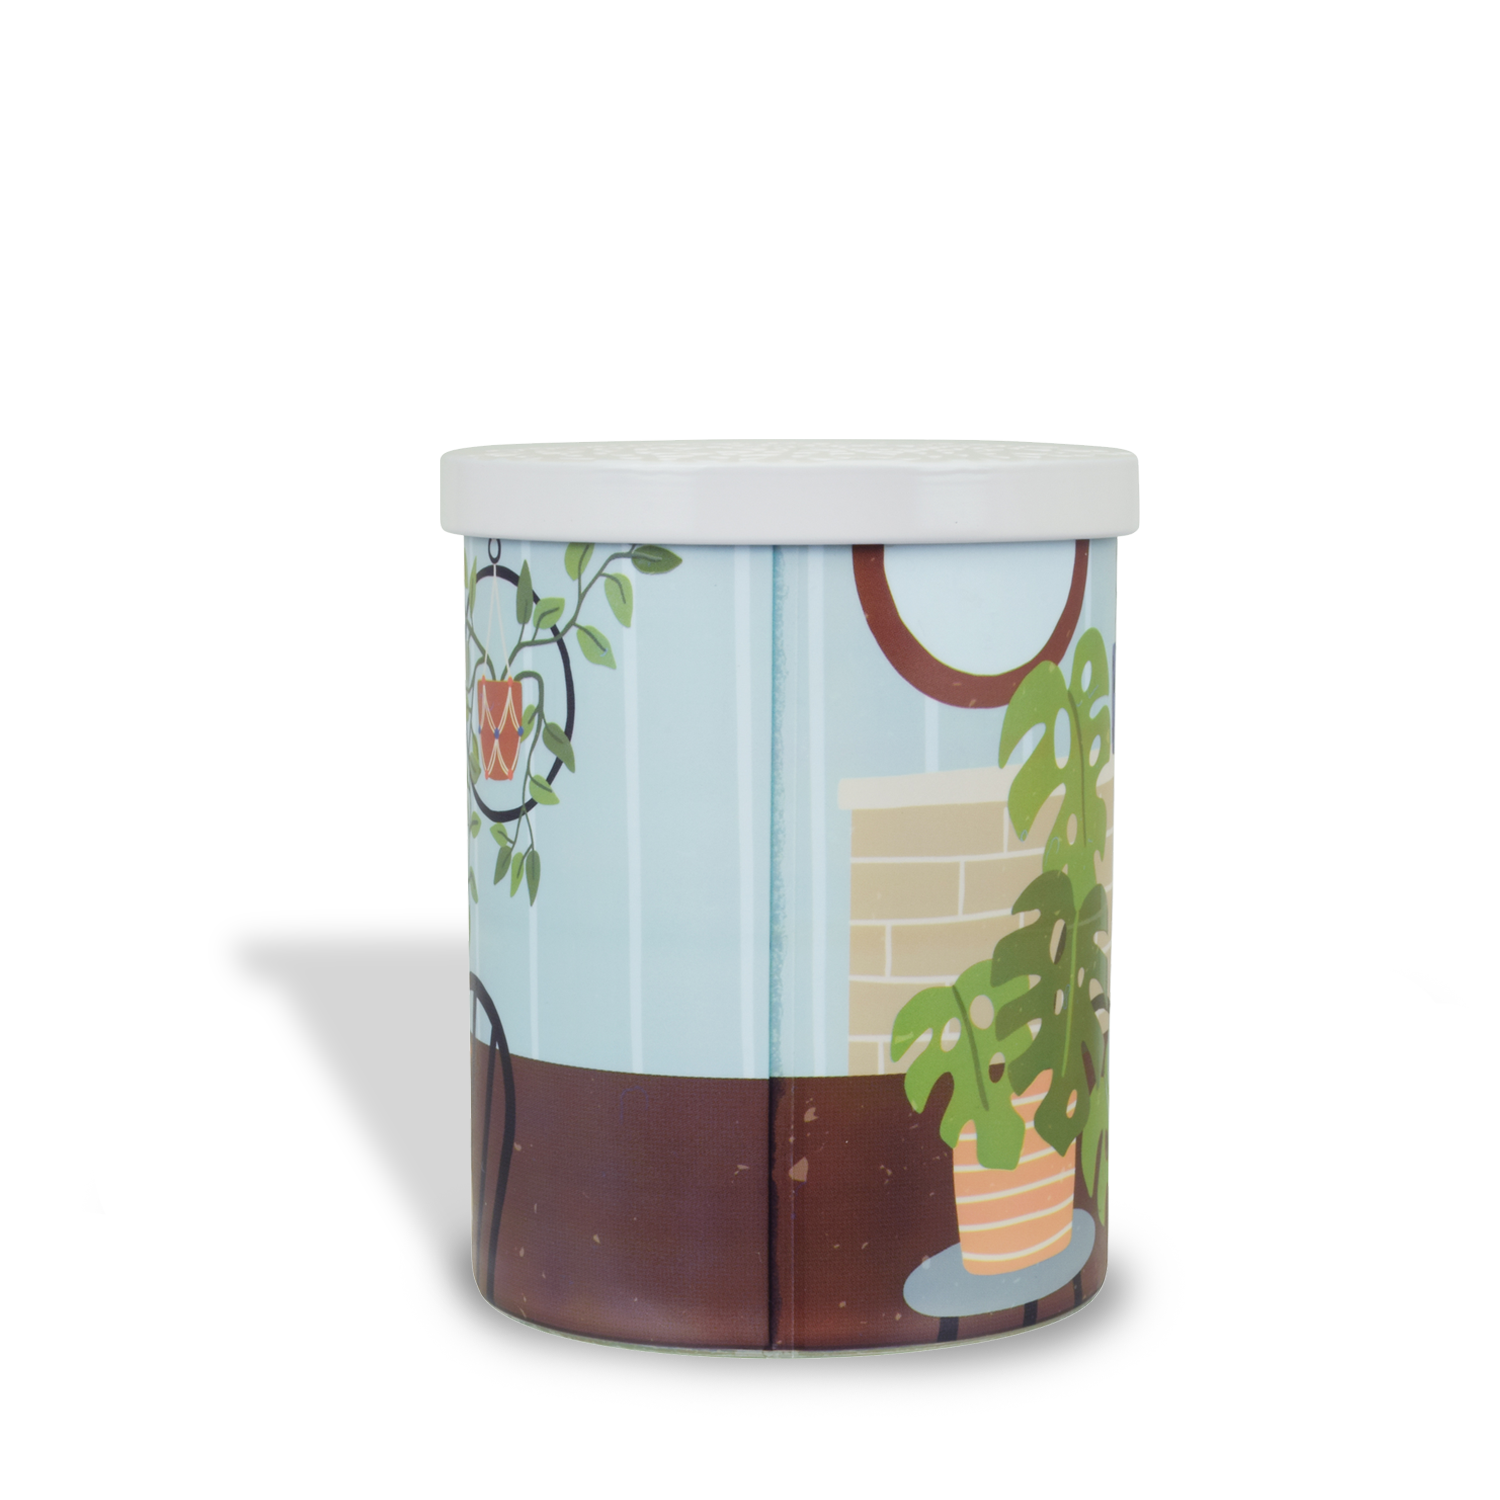 A Tuscany Candle canister with a white lid designed to neutralize odors, including pet odor and unpleasant smells, called the Secret Playplace Scented Jar Candle (14 oz) – Pet Odor Control Collection.